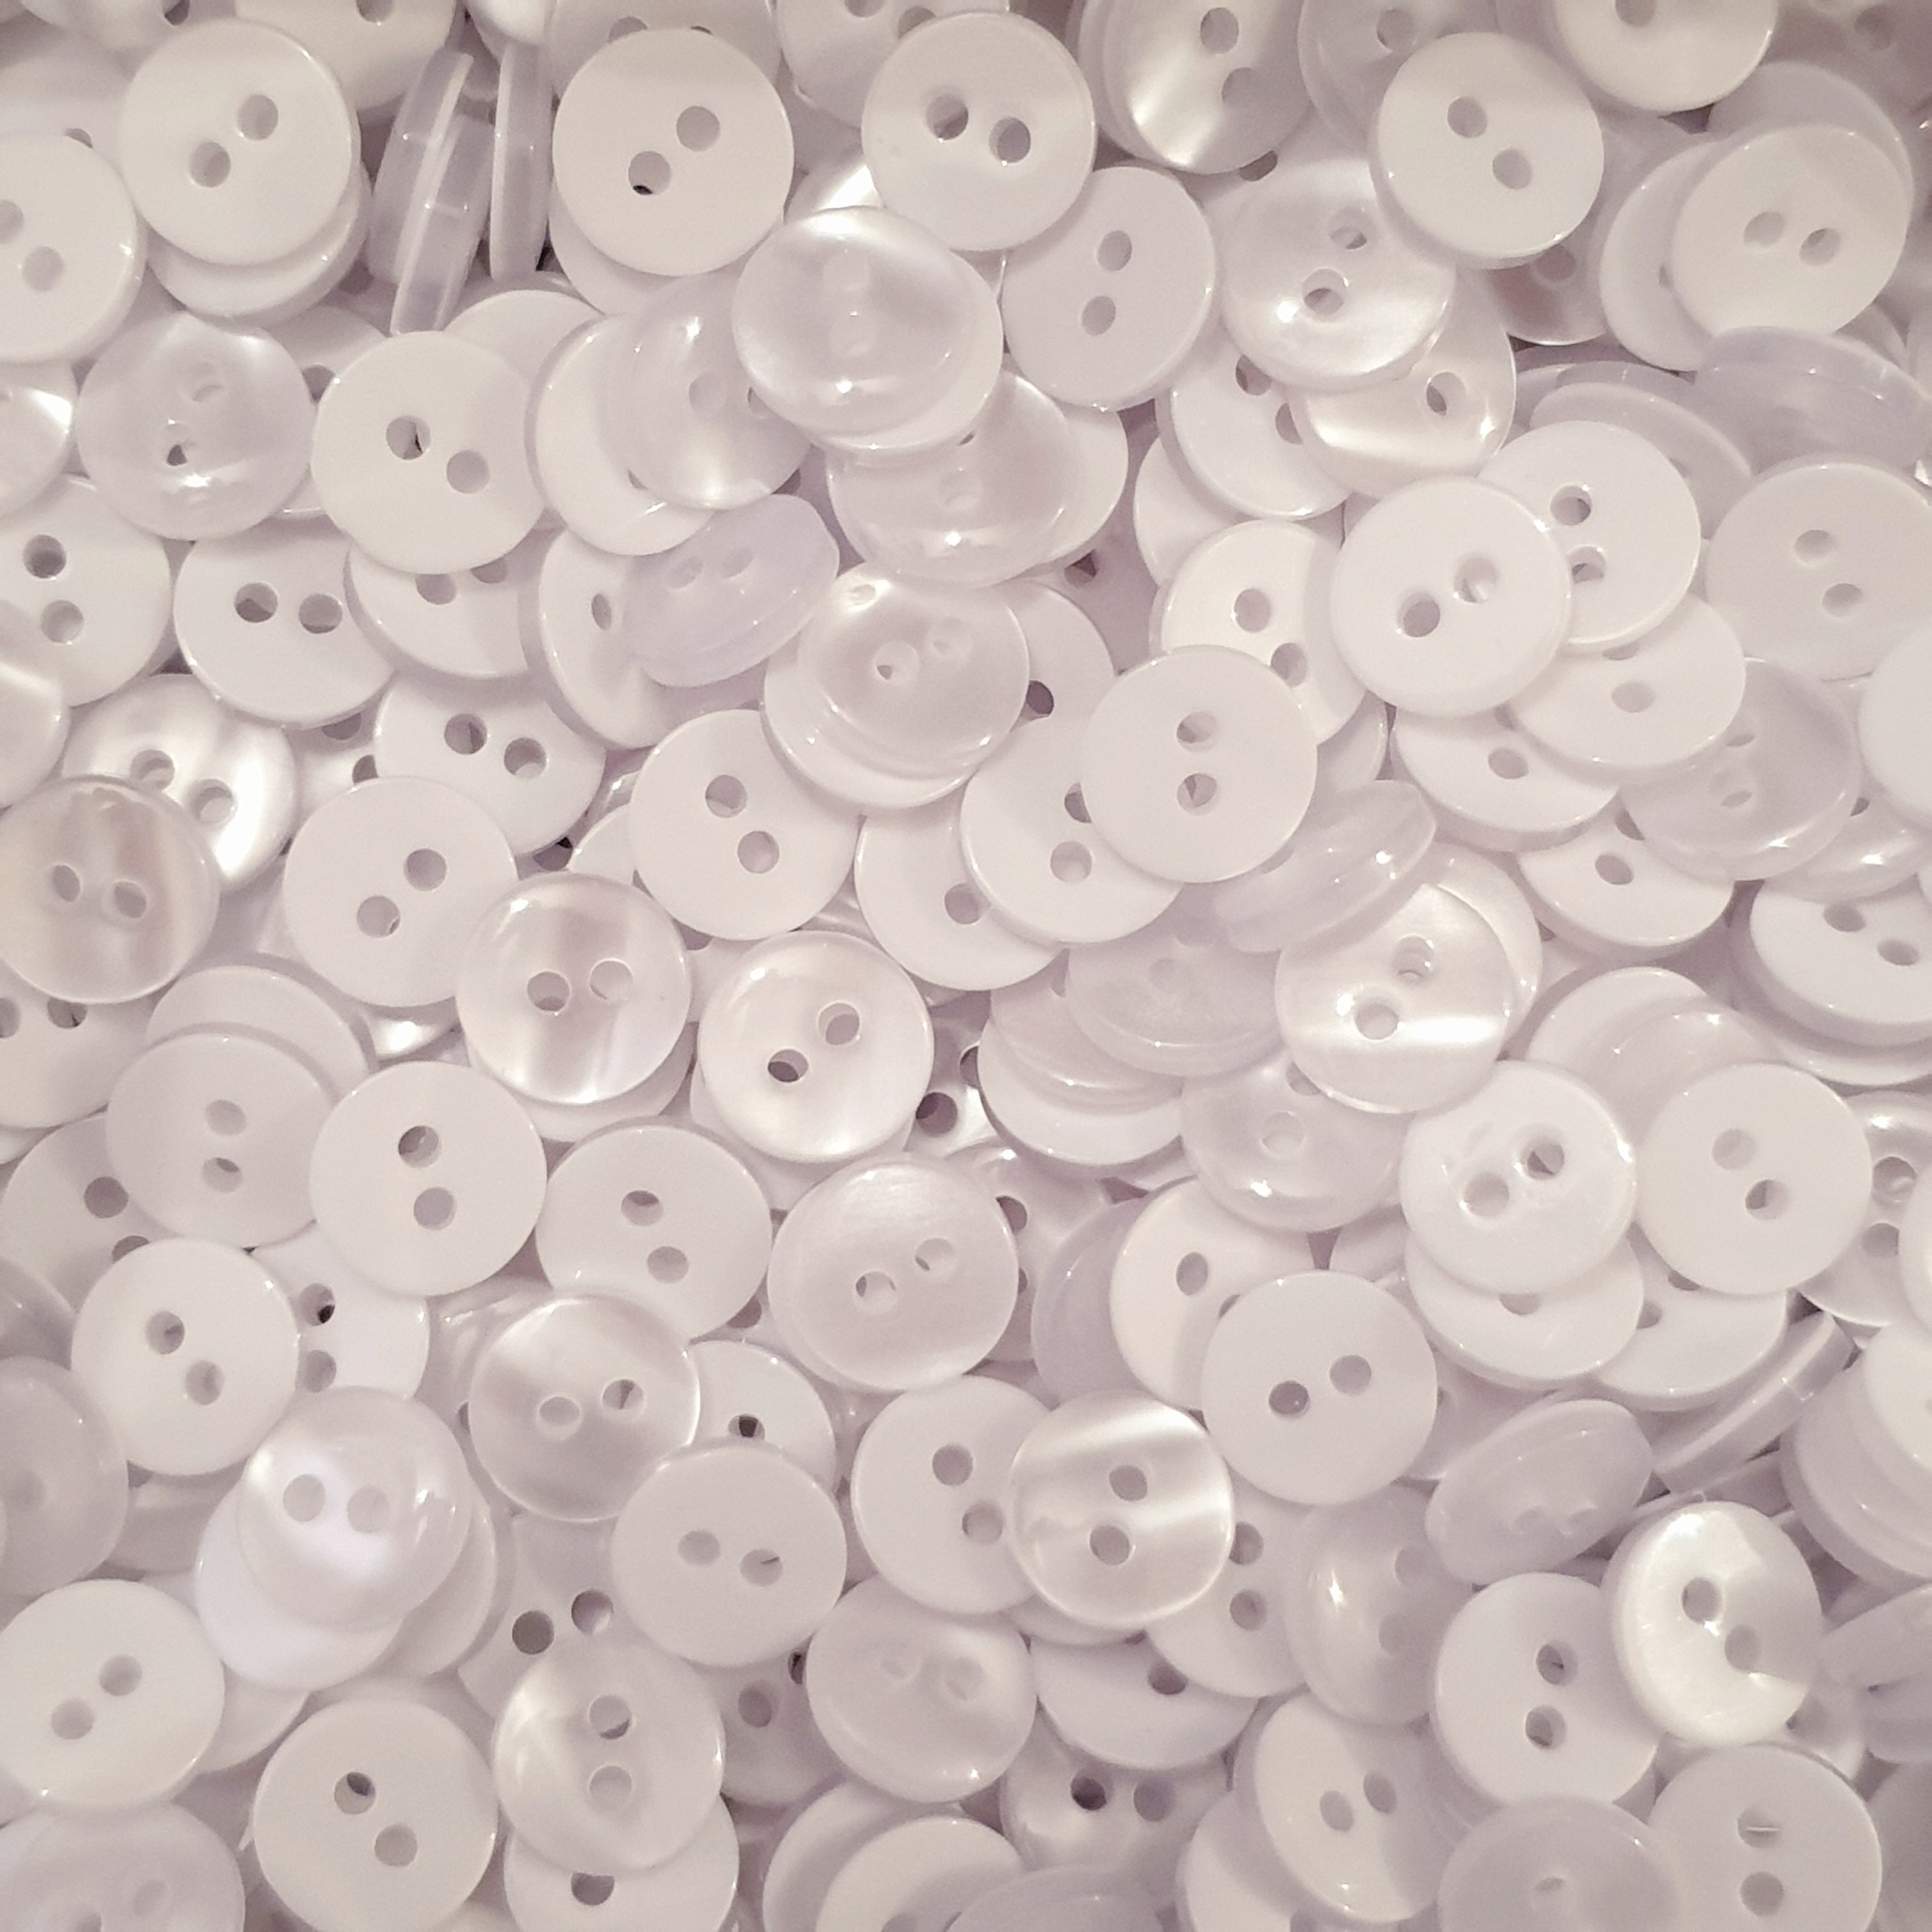 MajorCrafts 80pcs 9mm White Pearlescent 2 Holes Small Round Resin Sewing Buttons